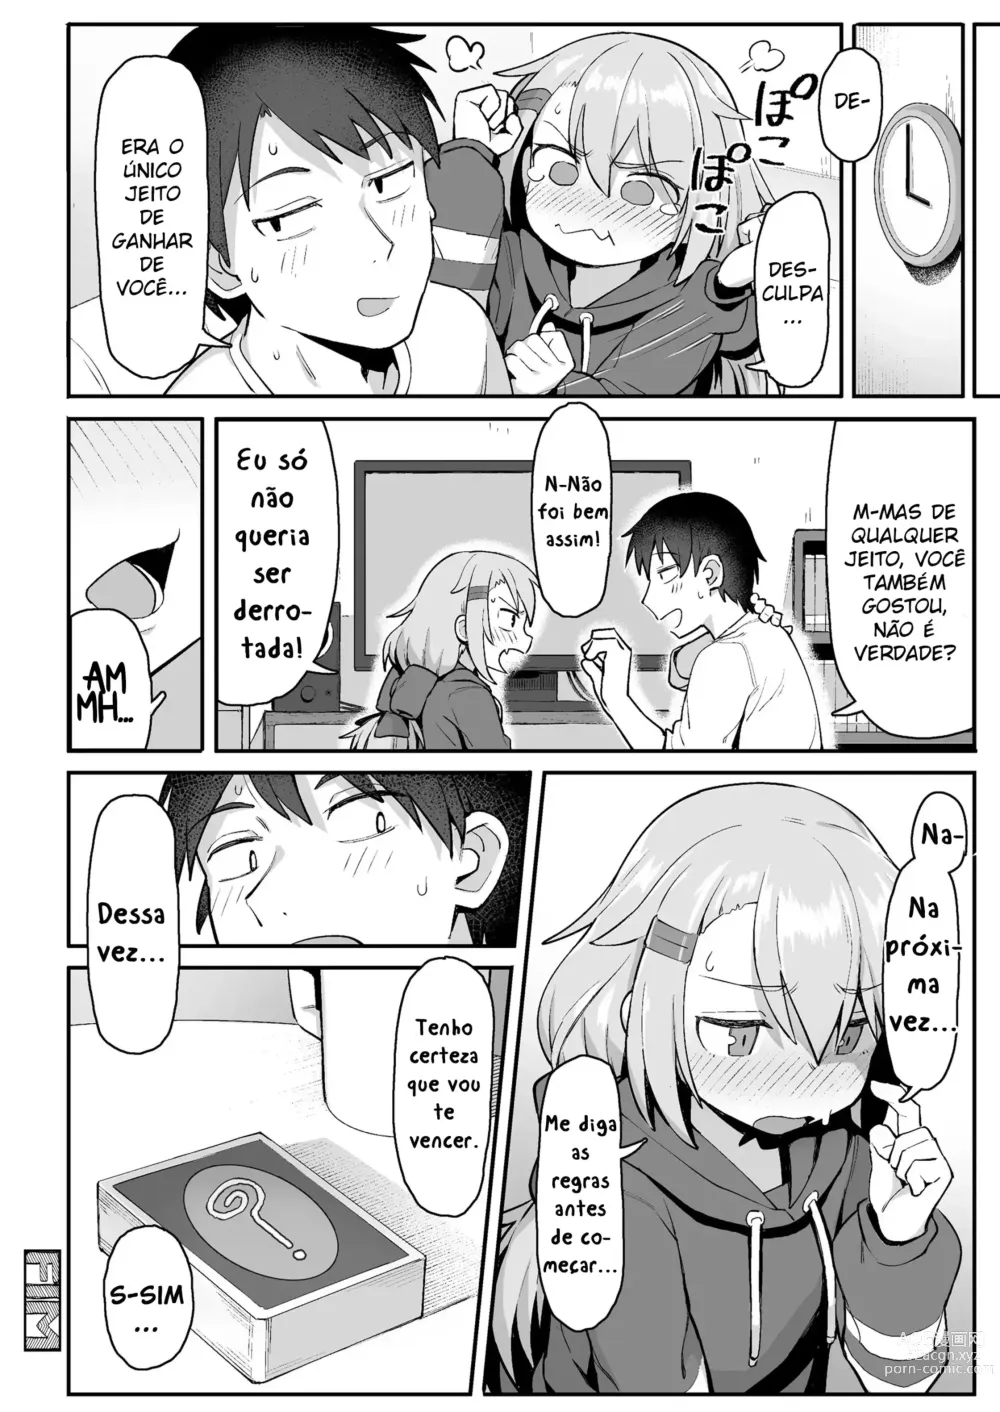 Page 26 of doujinshi Odeio Perder